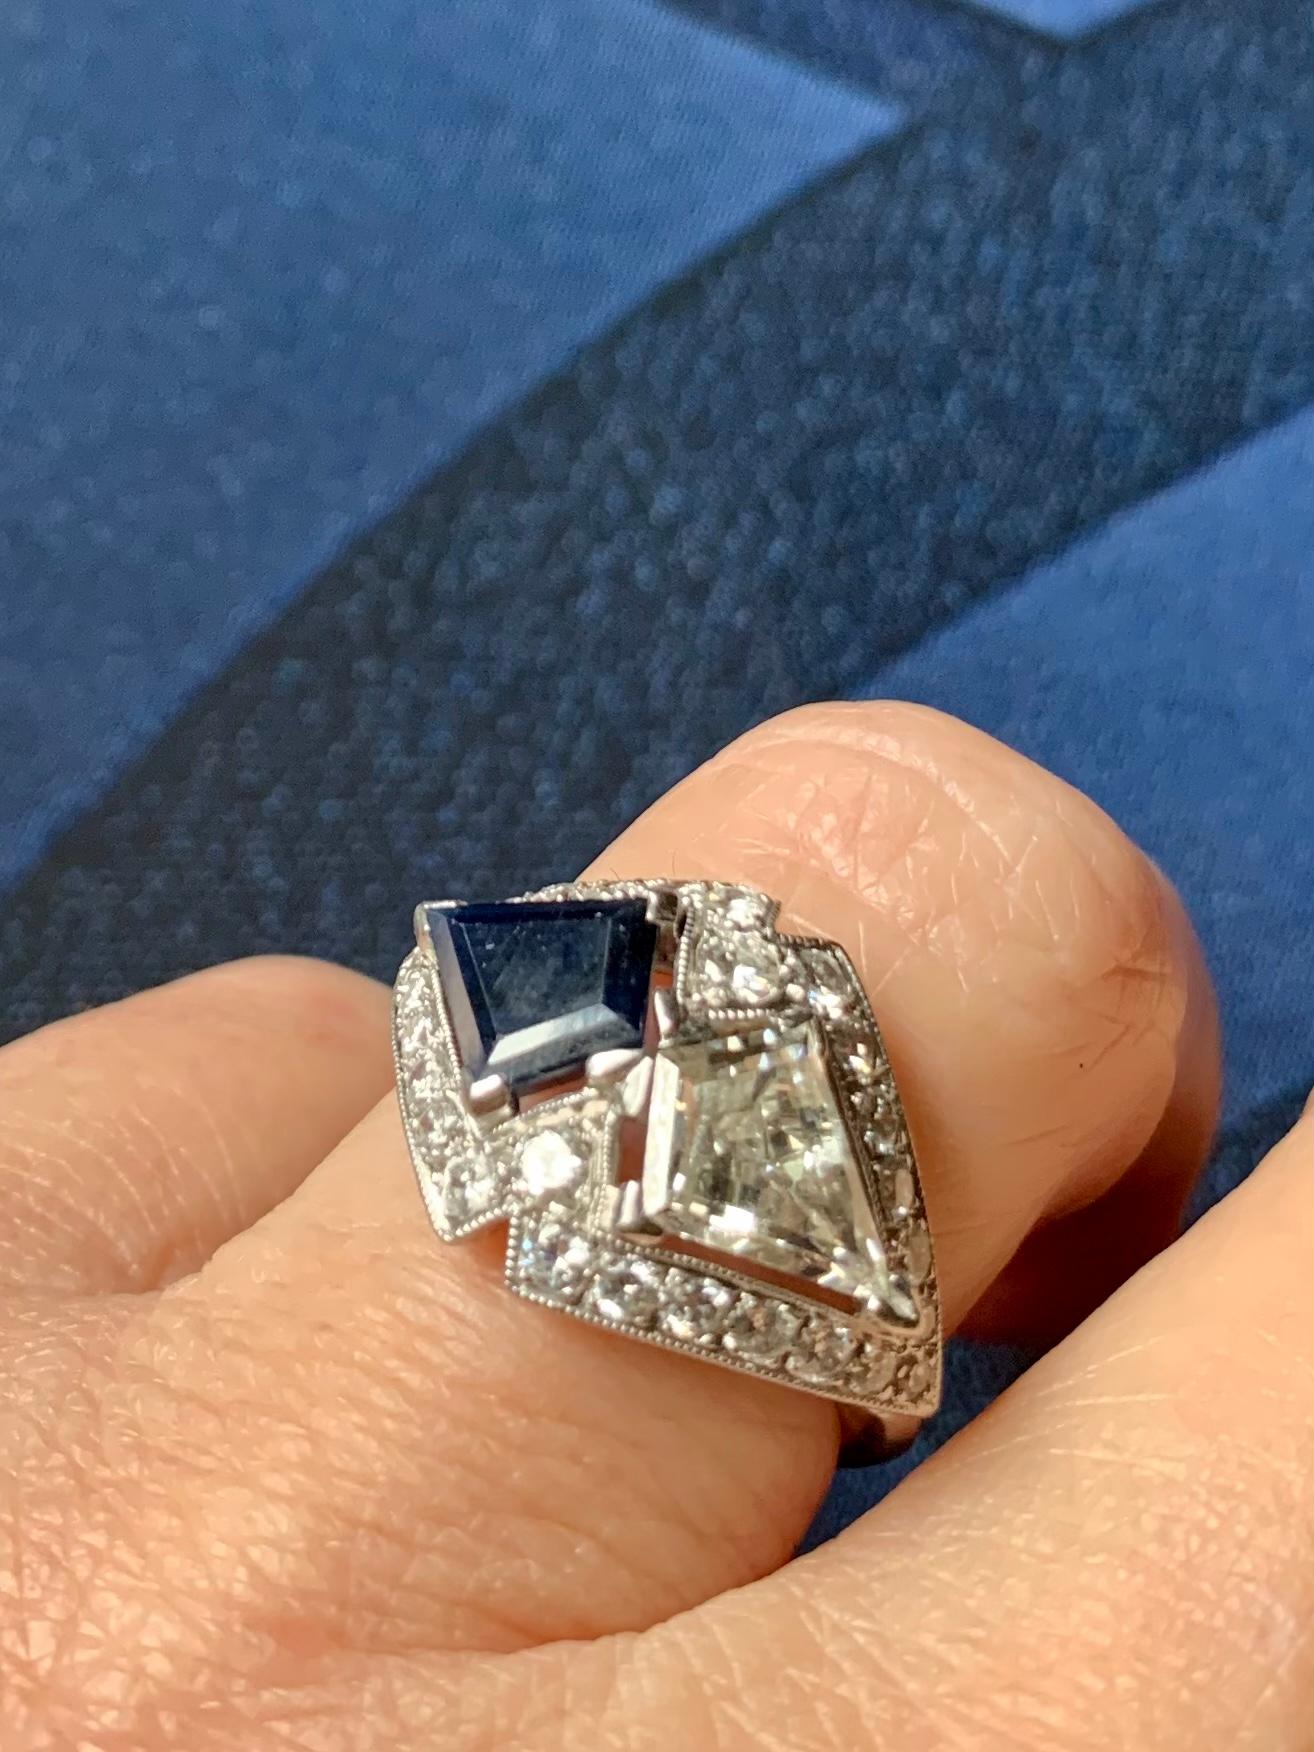 Stunning, rare Art Deco period platinum Moi et Toi ring featuring an impressive pair of kite cut natural diamond and natural sapphire gemstones framed by Old European cut and single cut diamonds. 
Sleek and Modern, distinctively Art Deco, this